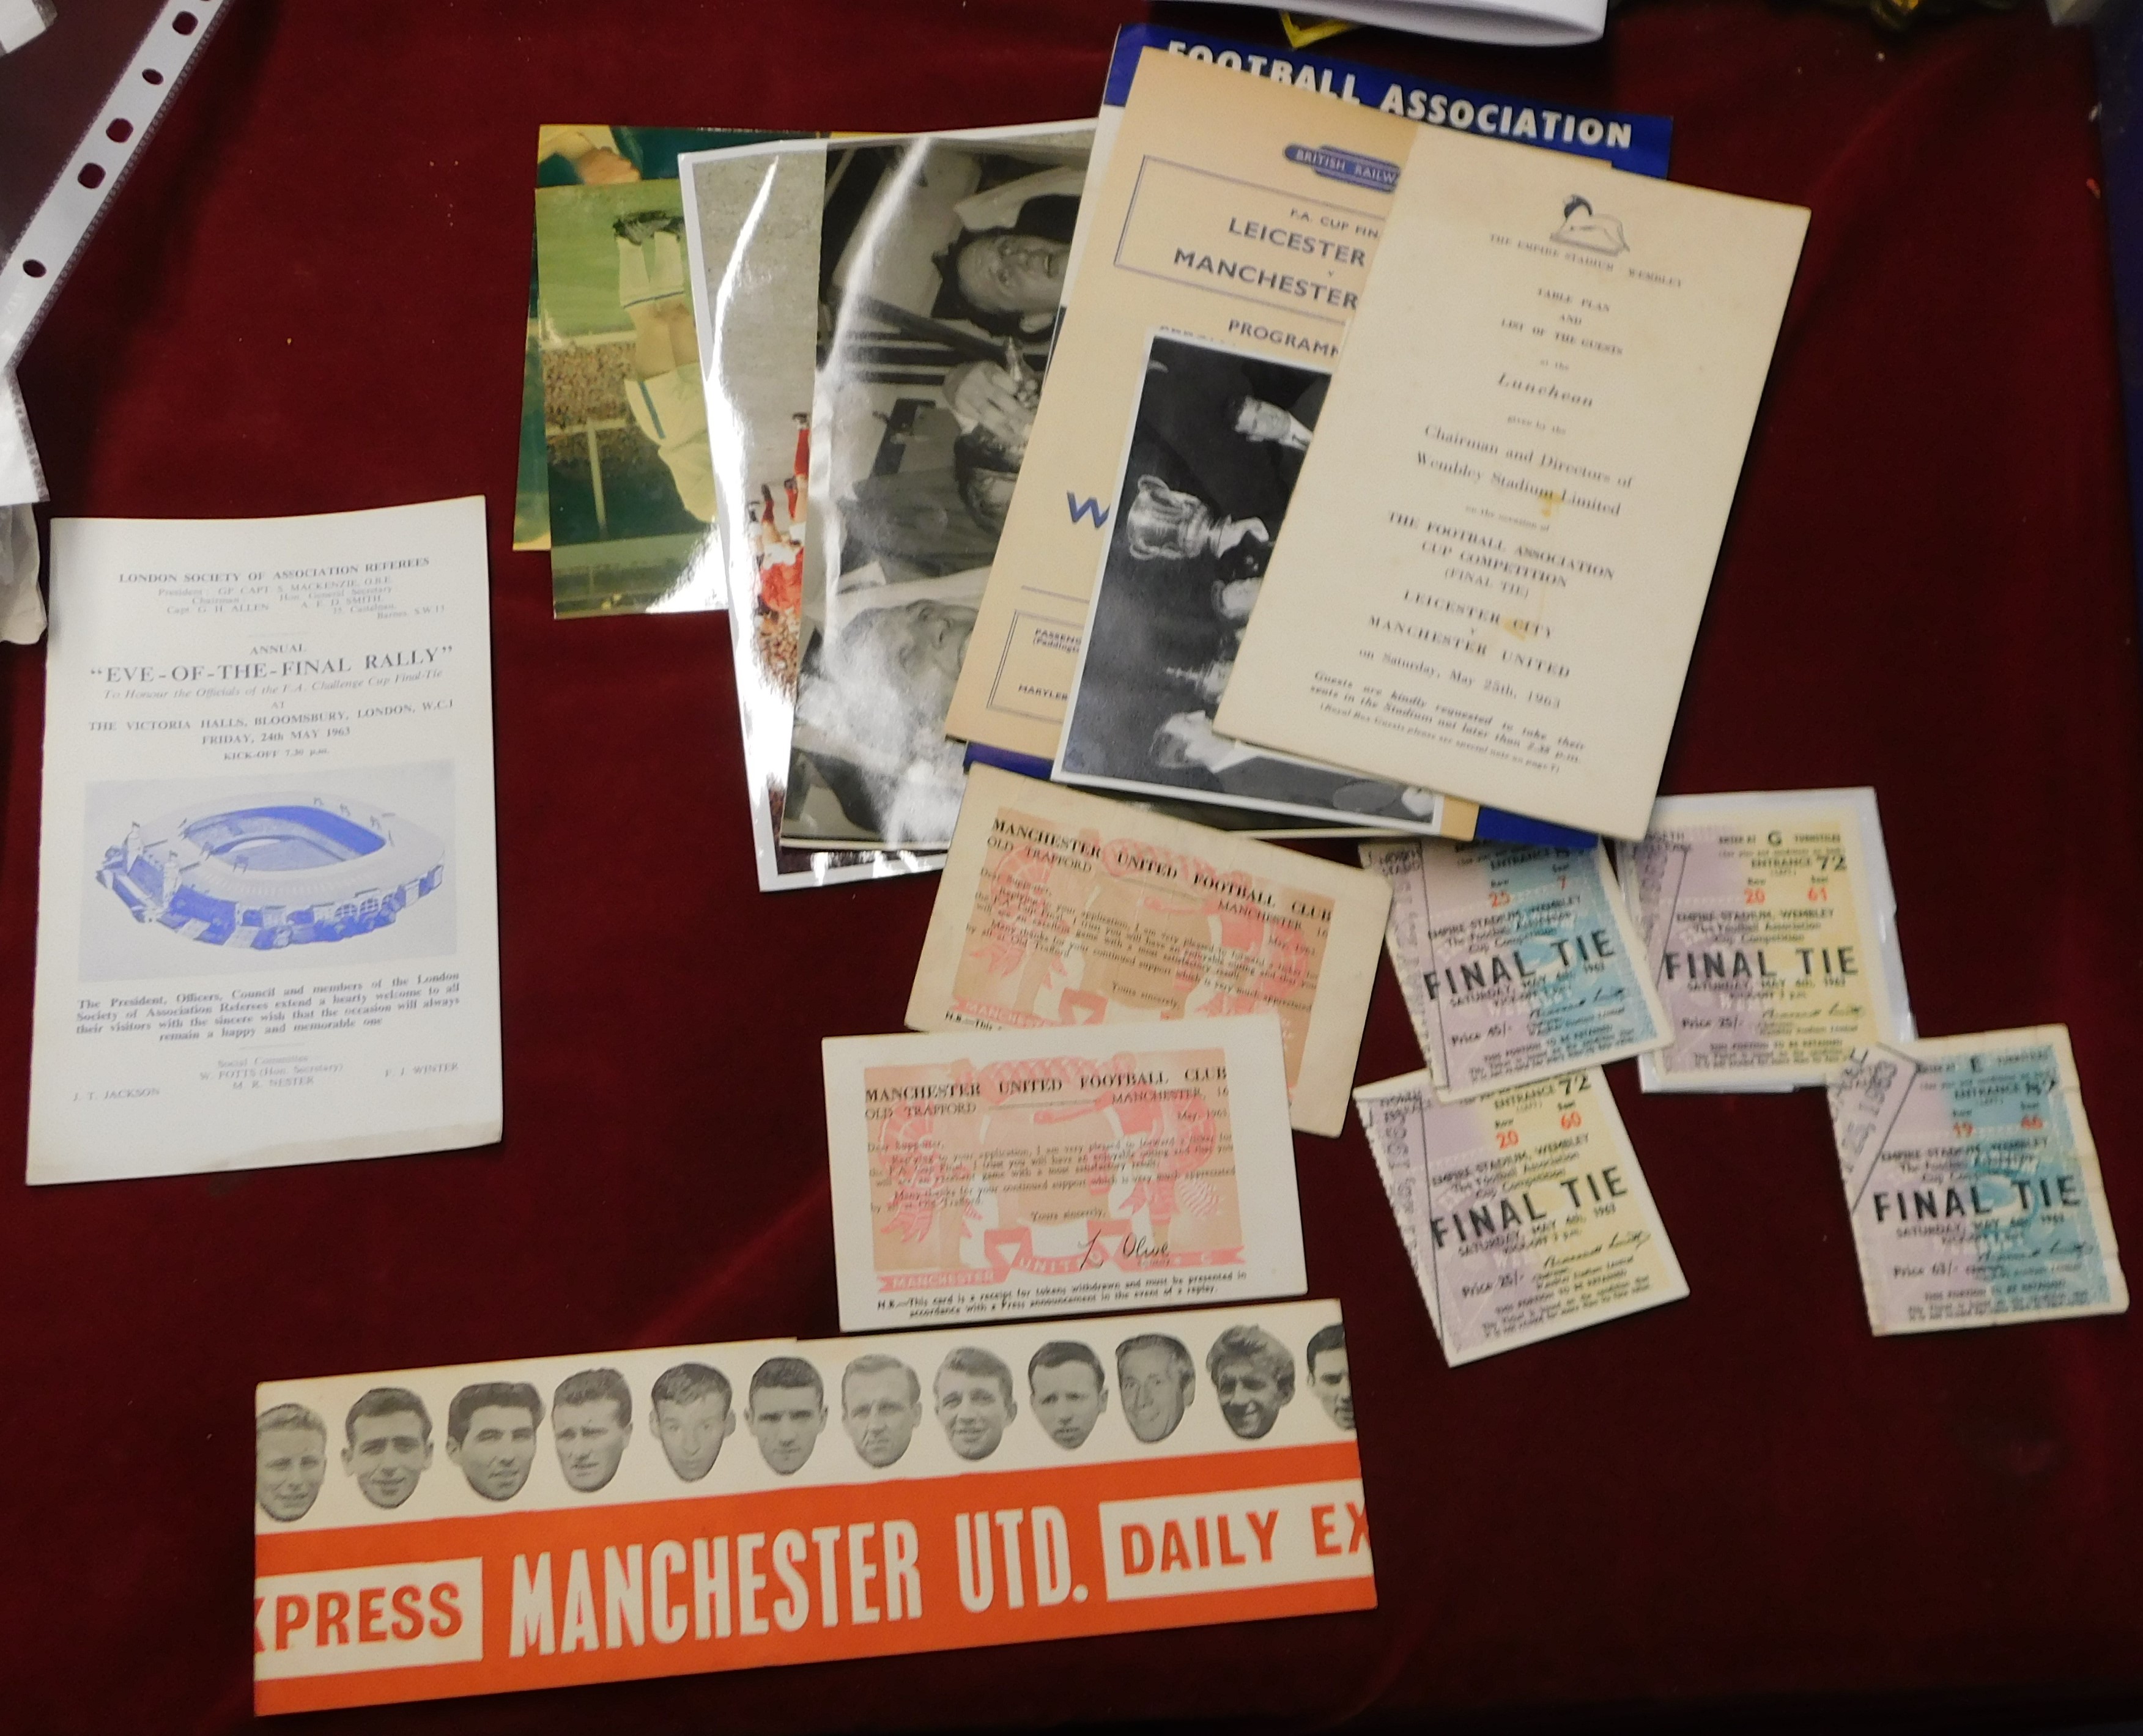 FA Cup Final Leicester City v Manchester United 1963 - a collection of ephemera from the Final